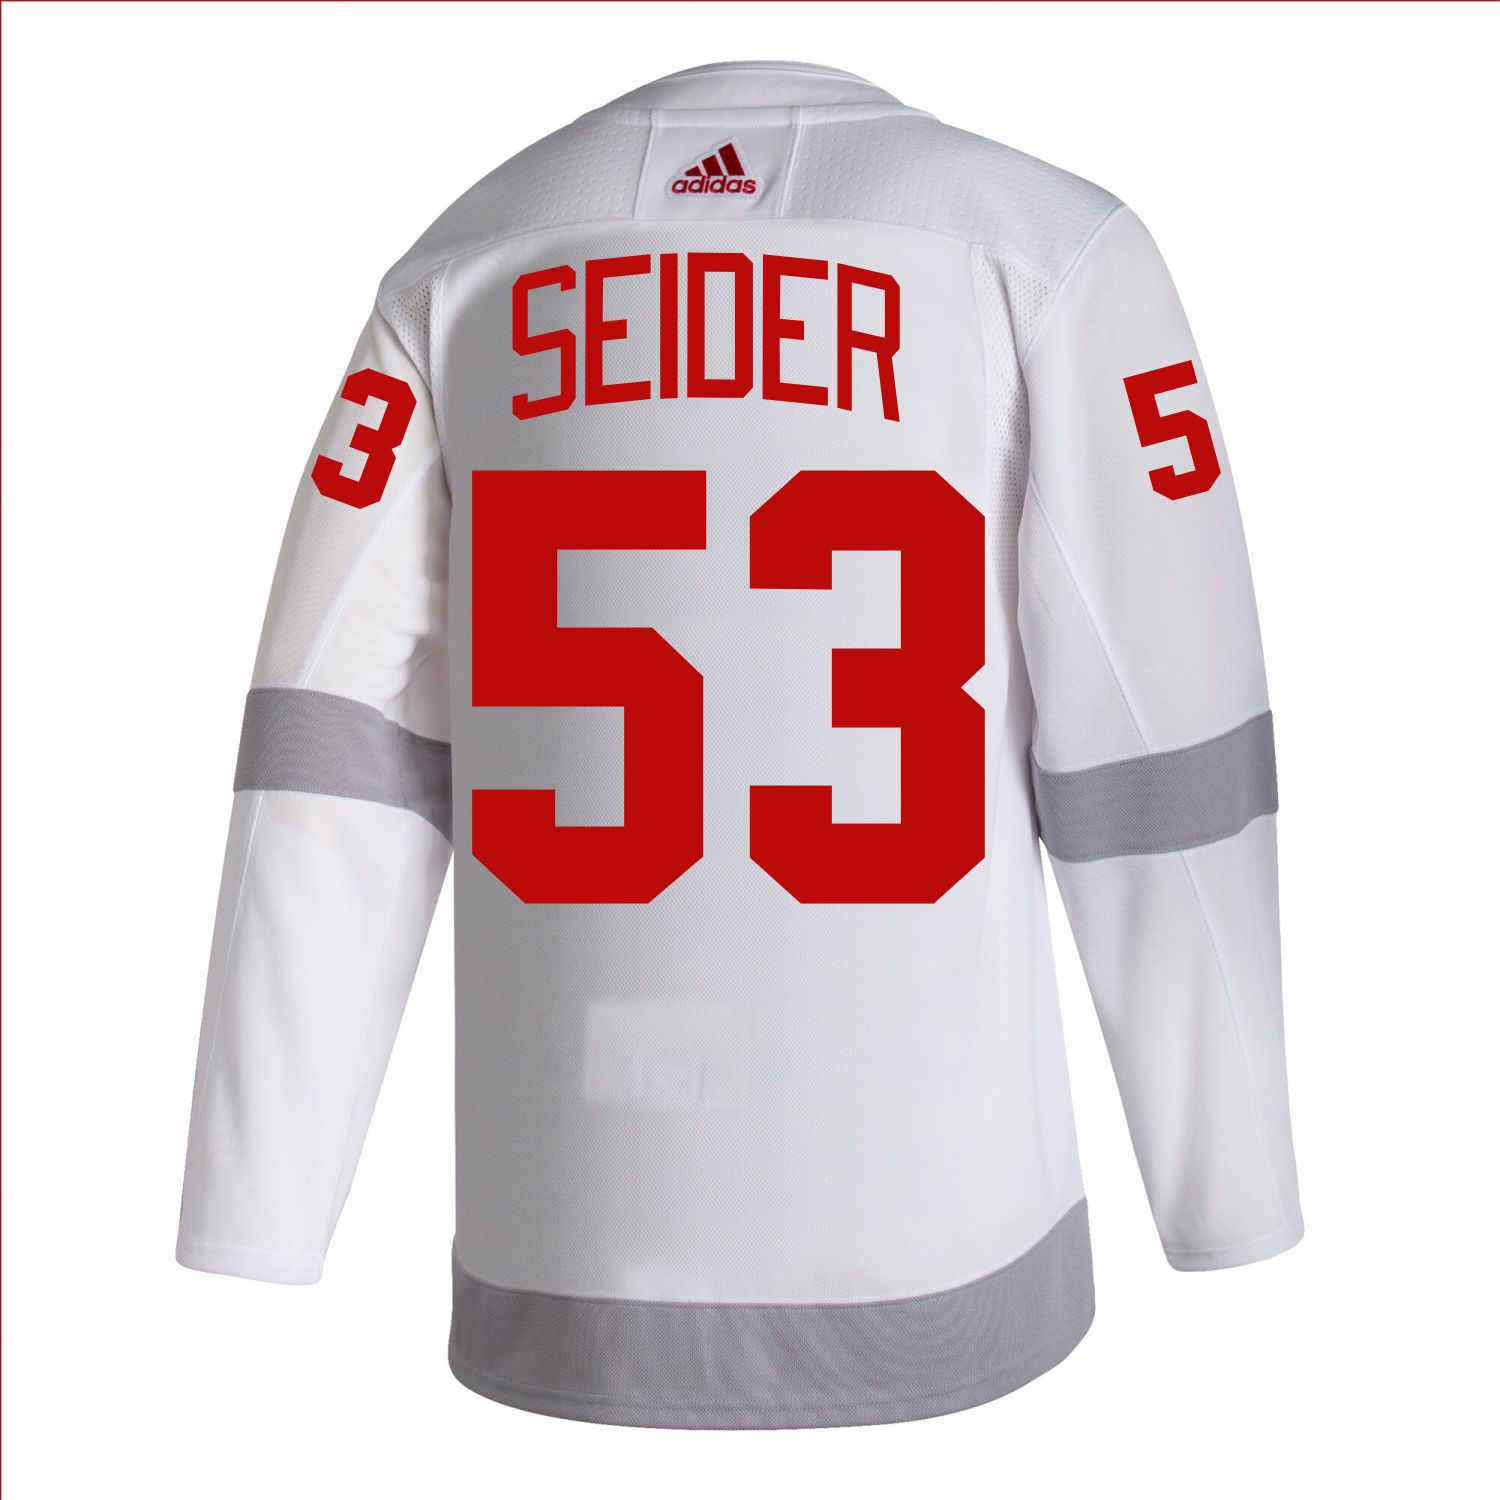 Moritz Seider #53 Detroit Red Wings Adidas Road Primegreen Authentic Jersey by Vintage Detroit Collection